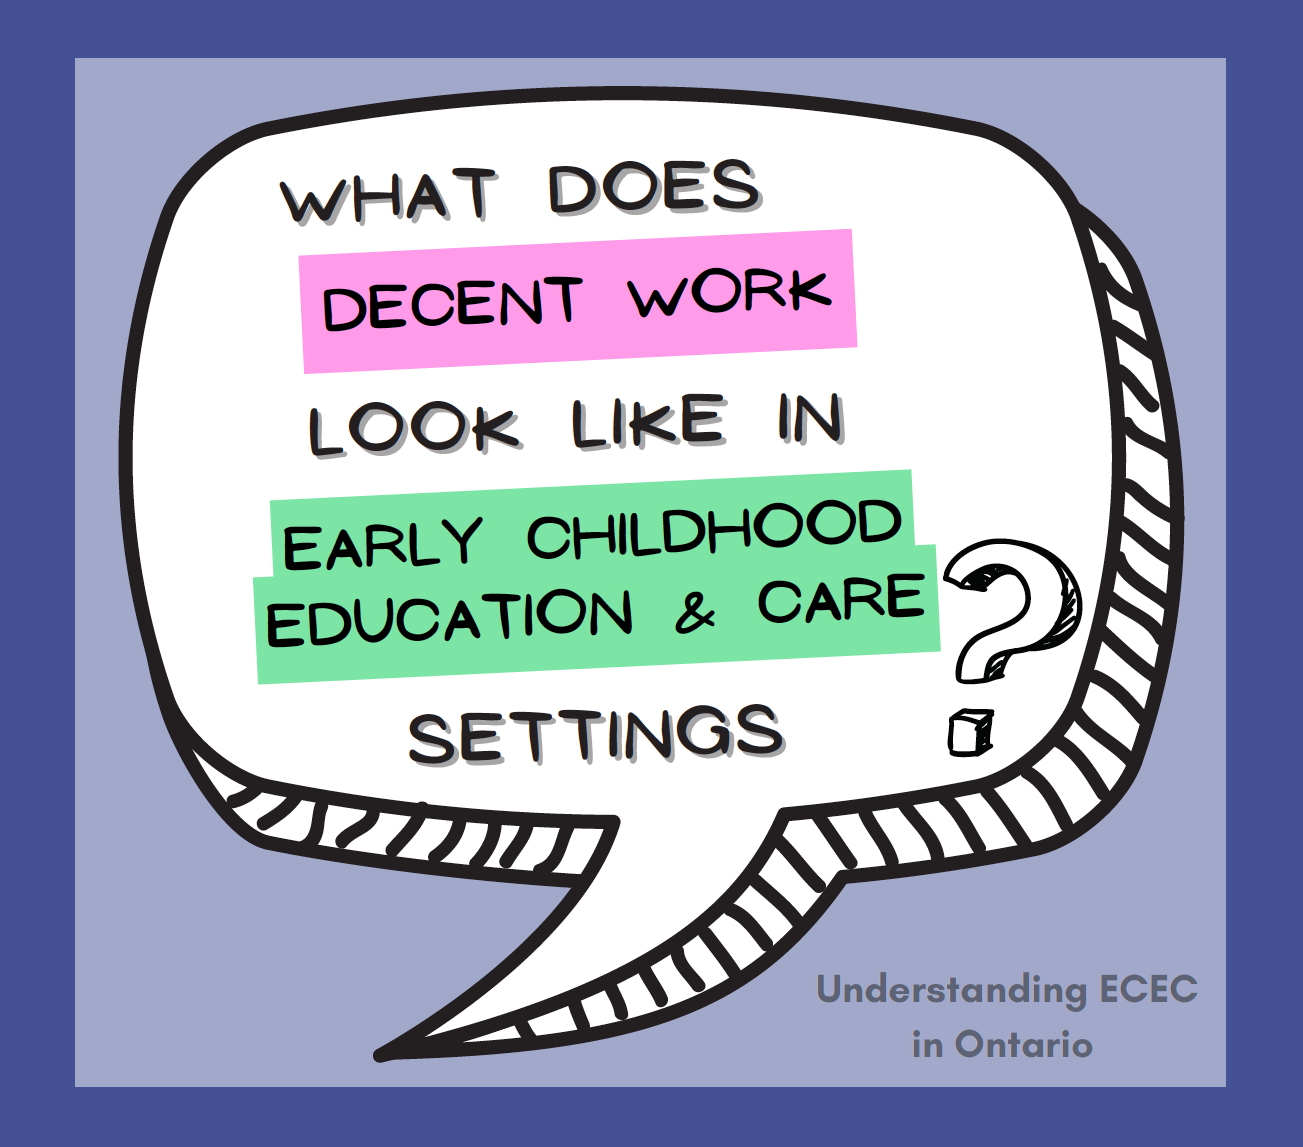 What does decent work look like in Early Childhood Education & Care settings?